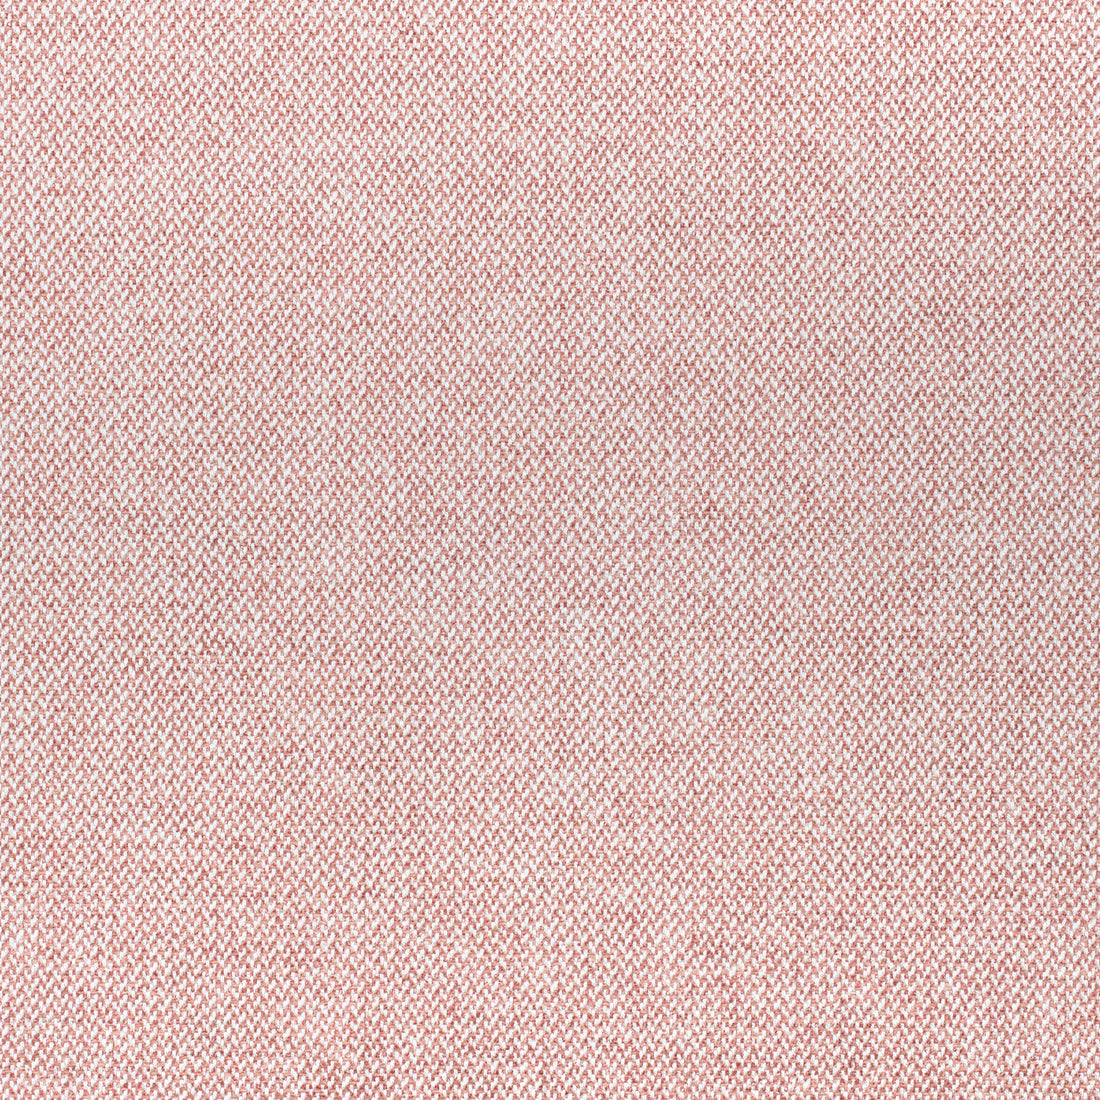 Picco fabric in blush color - pattern number W80705 - by Thibaut in the Woven Resource 11: Rialto collection